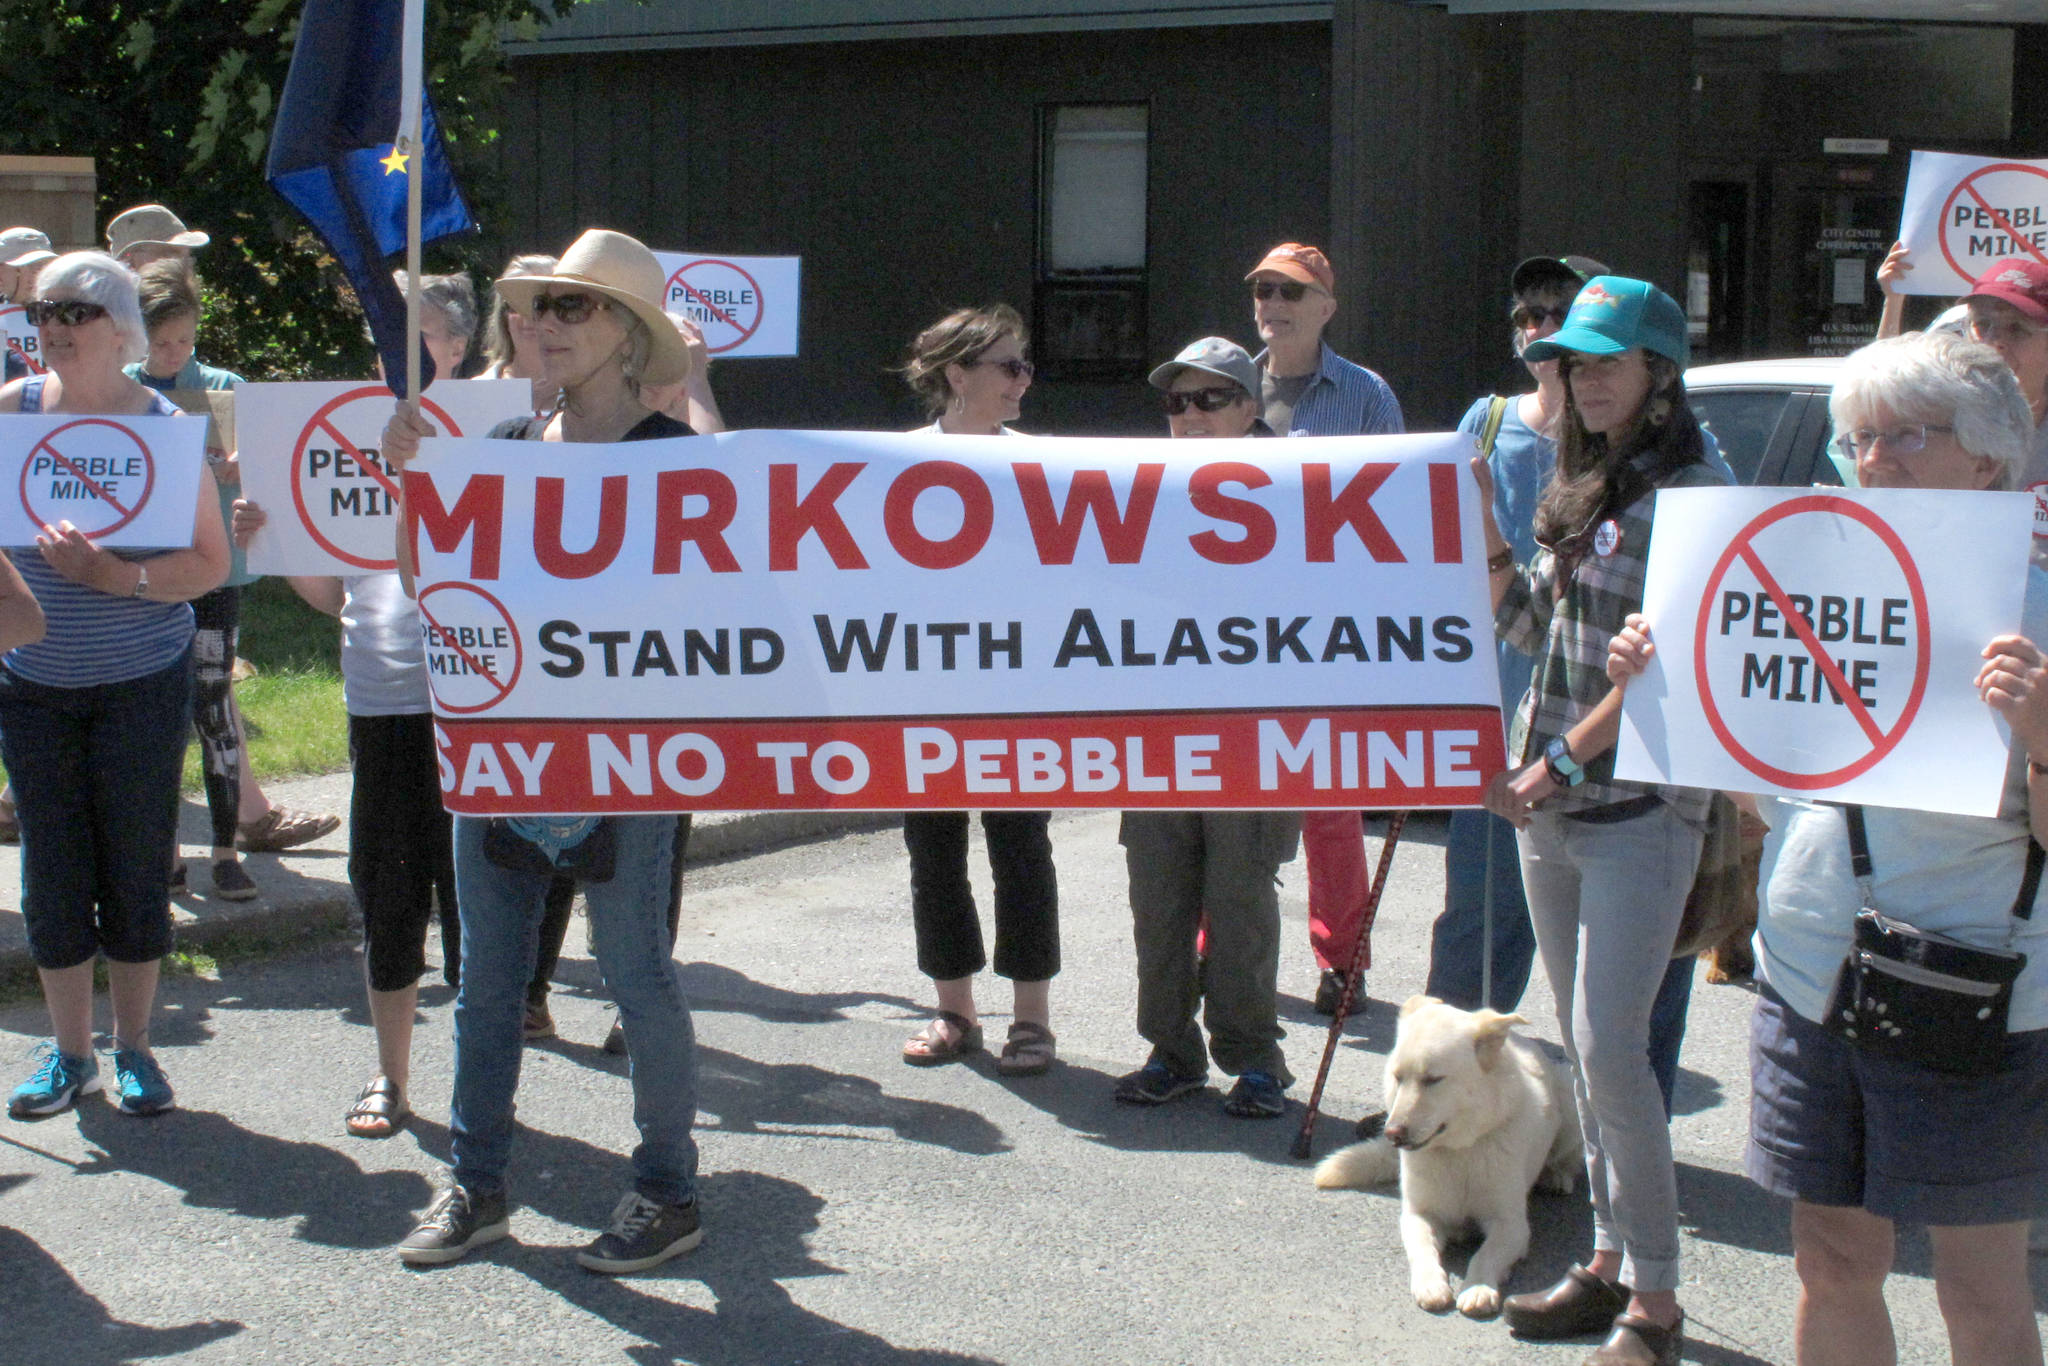 In this June 2019 photo, people gather outside U.S. Sen. Lisa Murkowski’s office in Juneau, Alaska, to protest the proposed Pebble Mine. The Pebble Limited Partnership, which wants to build a copper and gold mine near the headwaters of a major U.S. salmon fishery in southwest Alaska, says it plans to offer residents in the region a dividend. (AP Photo/Becky Bohrer, File)                                In this June 2019 photo, people gather outside U.S. Sen. Lisa Murkowski’s office in Juneau, Alaska, to protest the proposed Pebble Mine. The Pebble Limited Partnership, which wants to build a copper and gold mine near the headwaters of a major U.S. salmon fishery in southwest Alaska, says it plans to offer residents in the region a dividend. (AP Photo/Becky Bohrer, File)